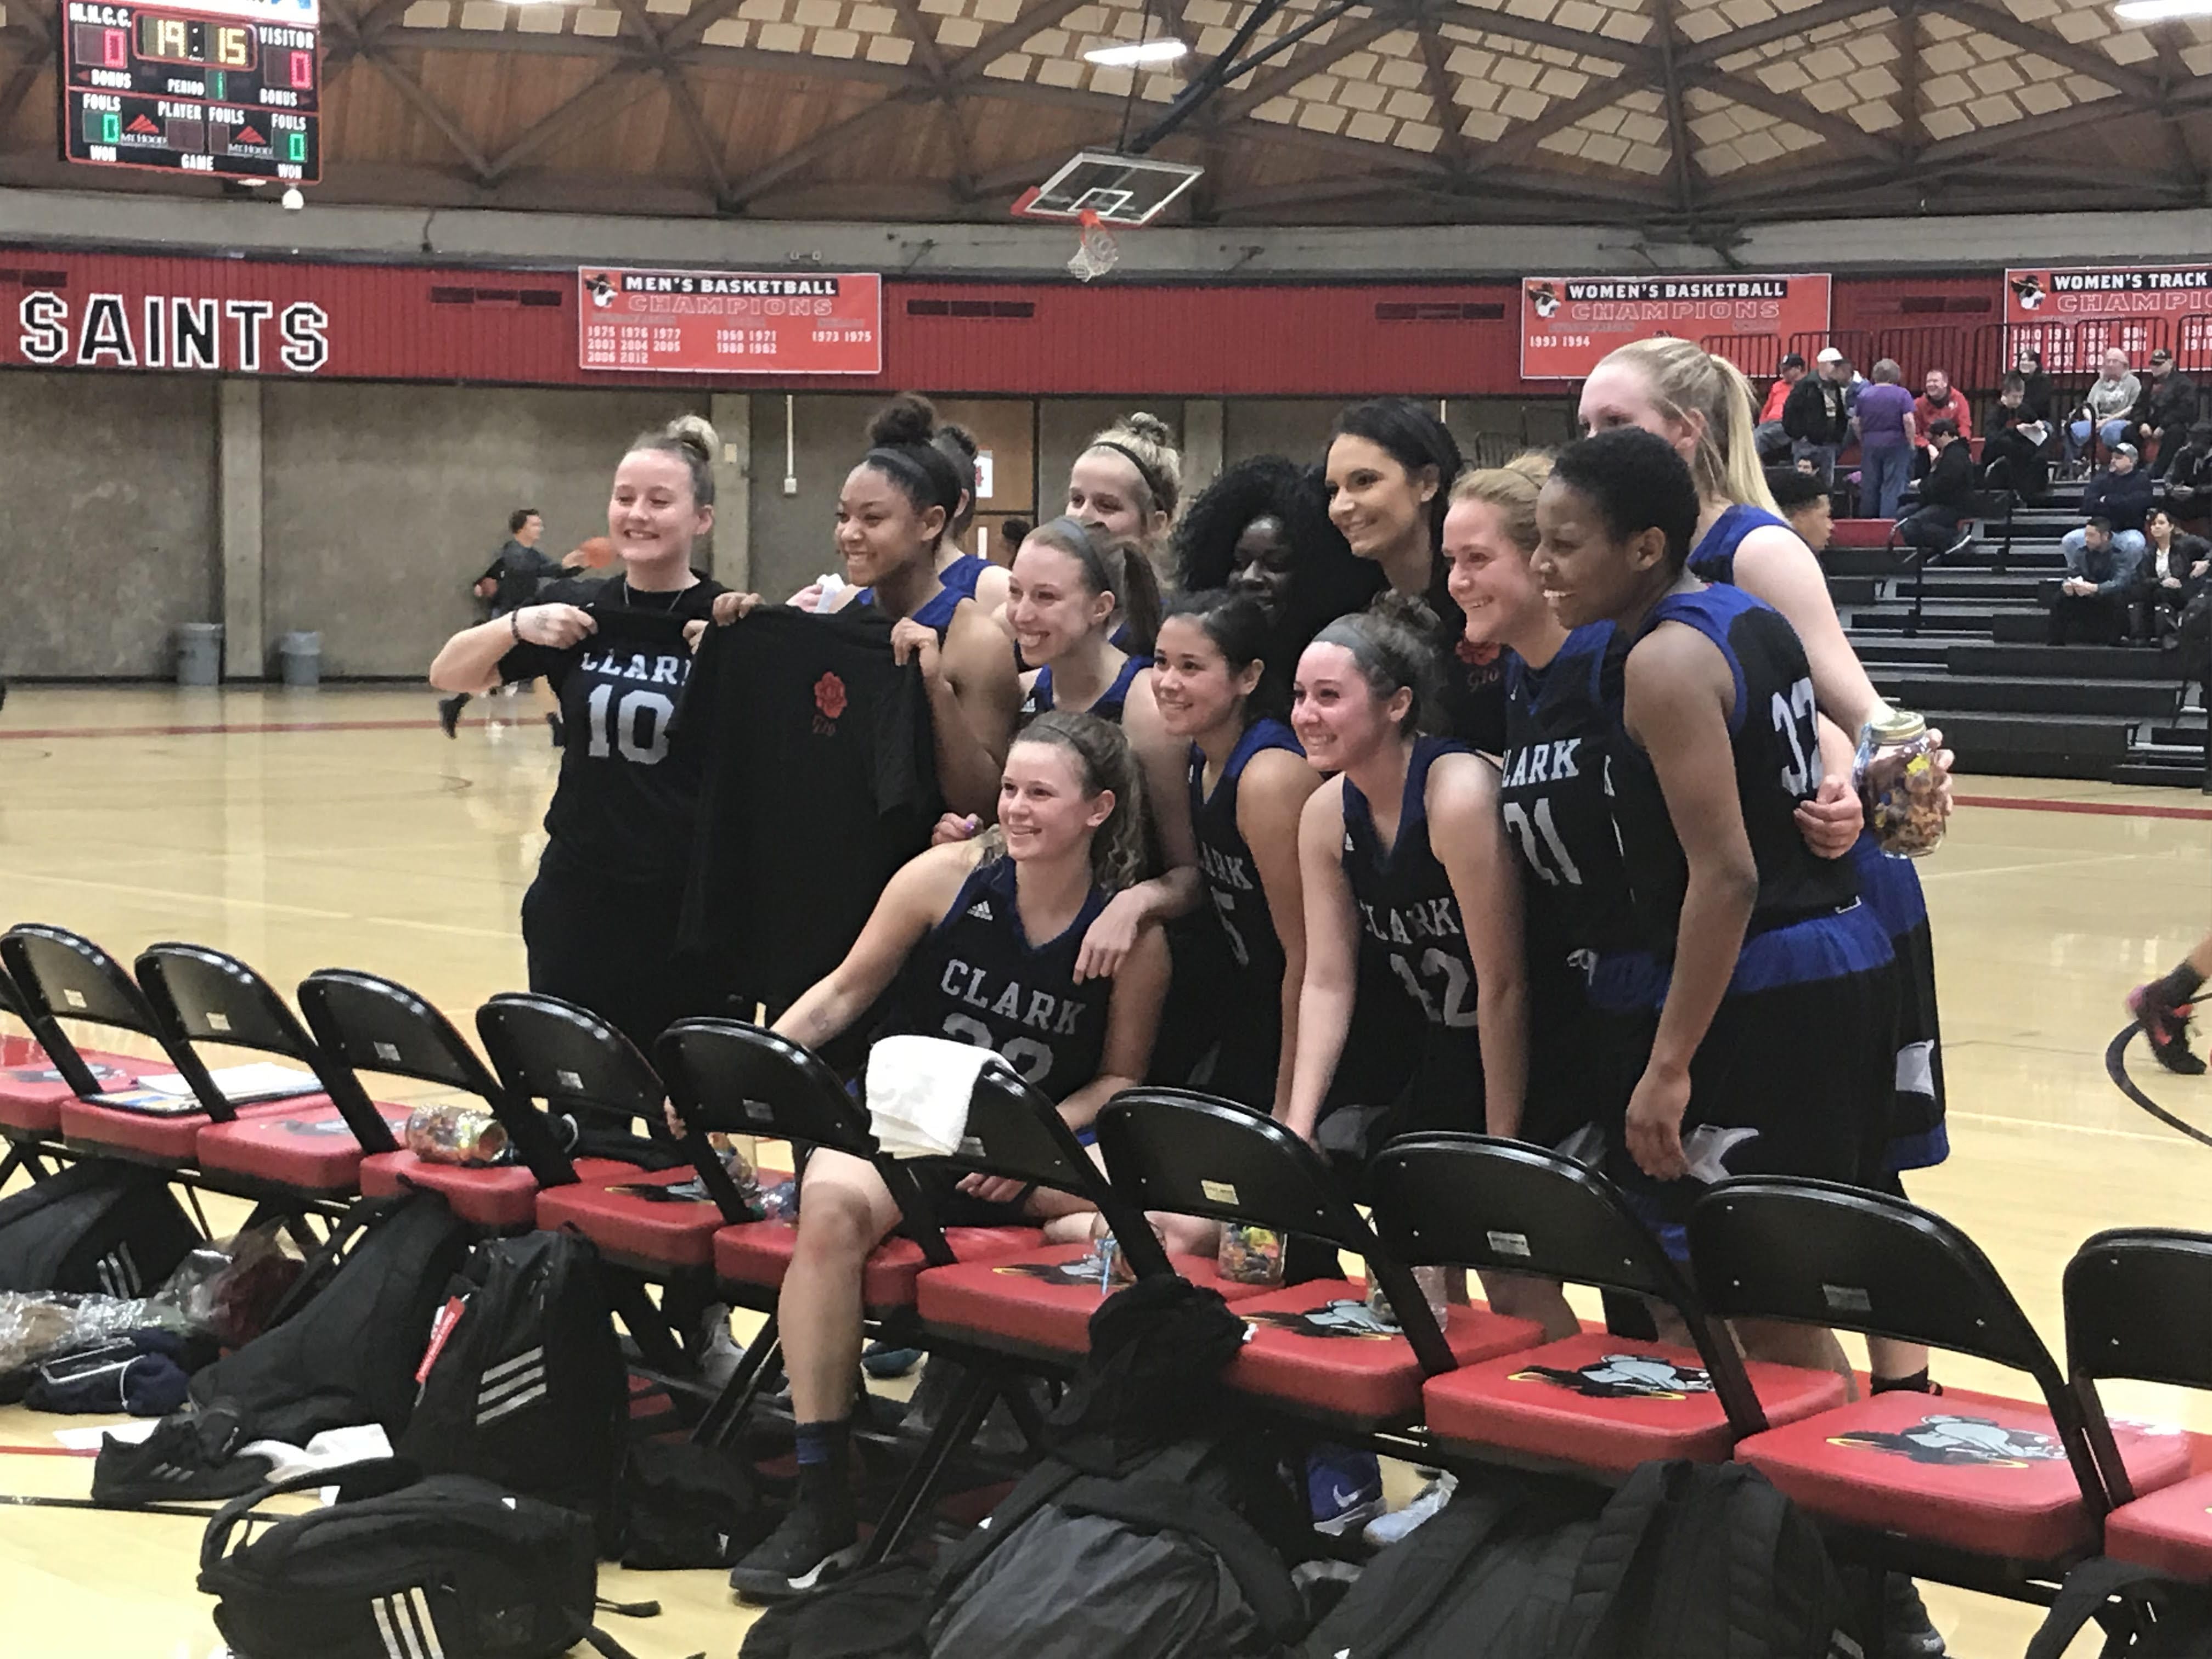 Days after losing teammate, Clark College women get first win of season